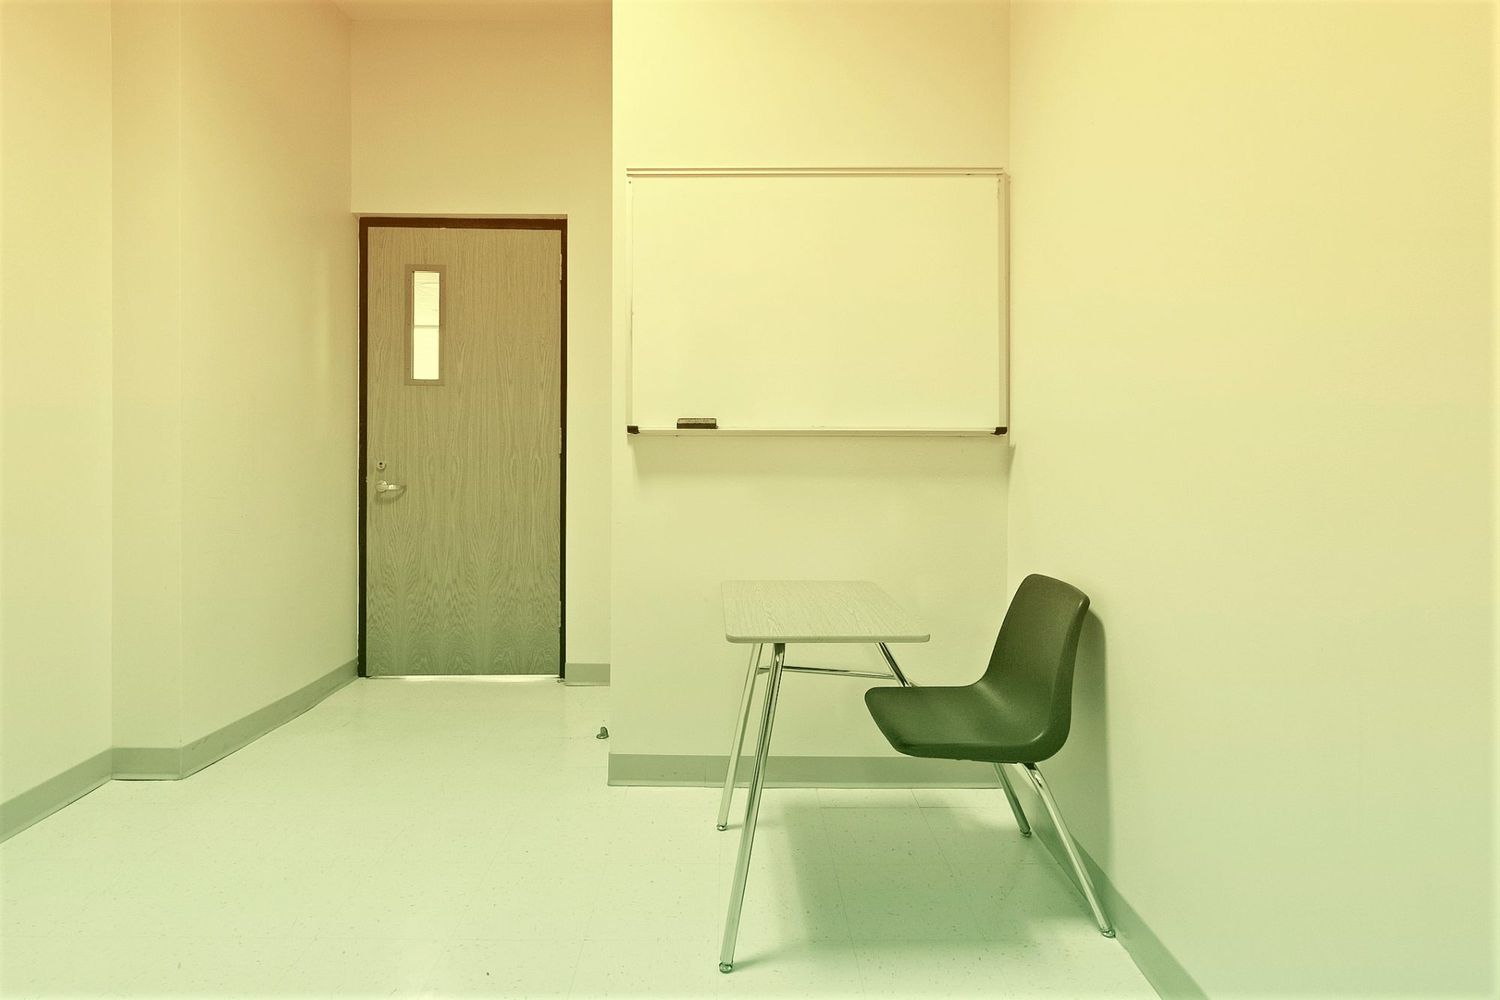 a school chair and desk in an empty room with a dry erase board on the wall and an entrance door